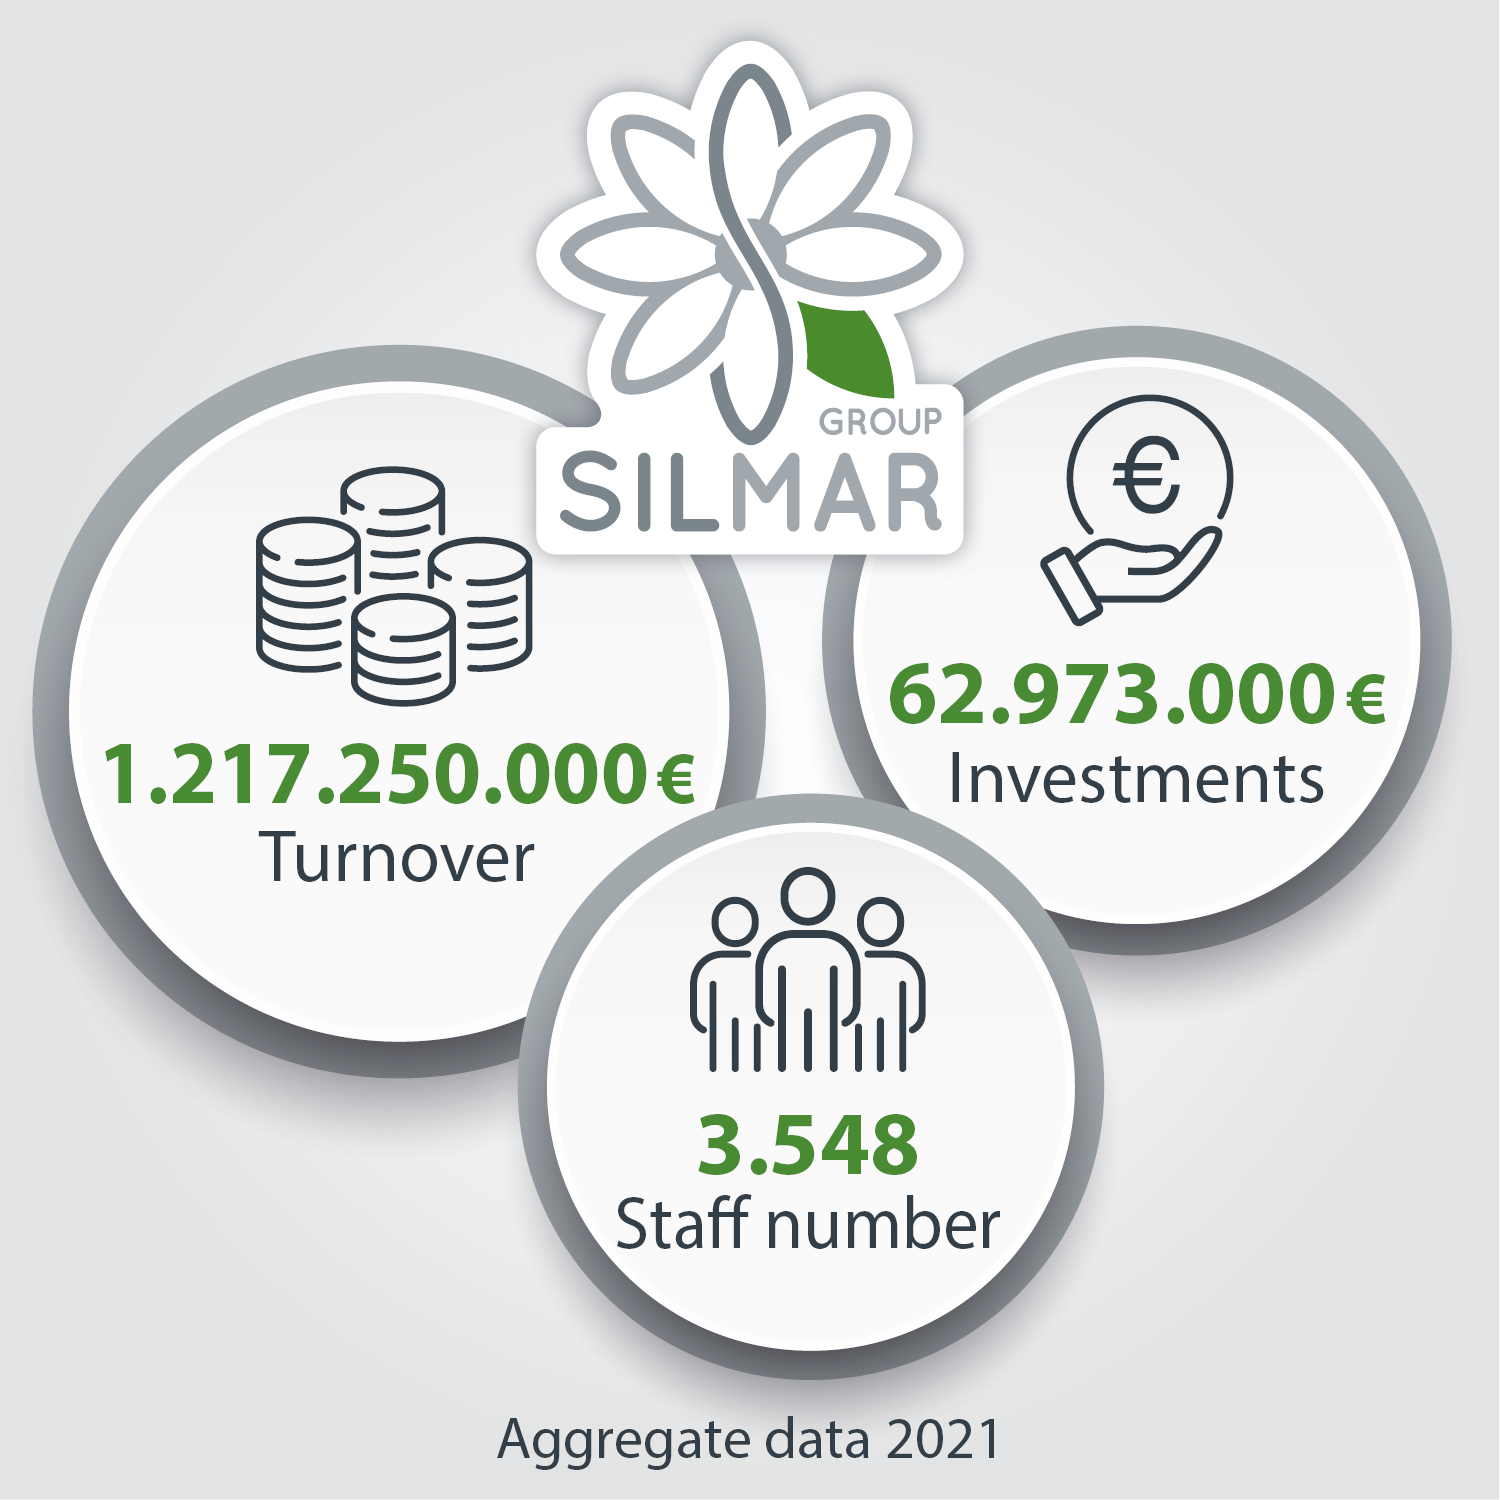 Silmar Group annual report 2021